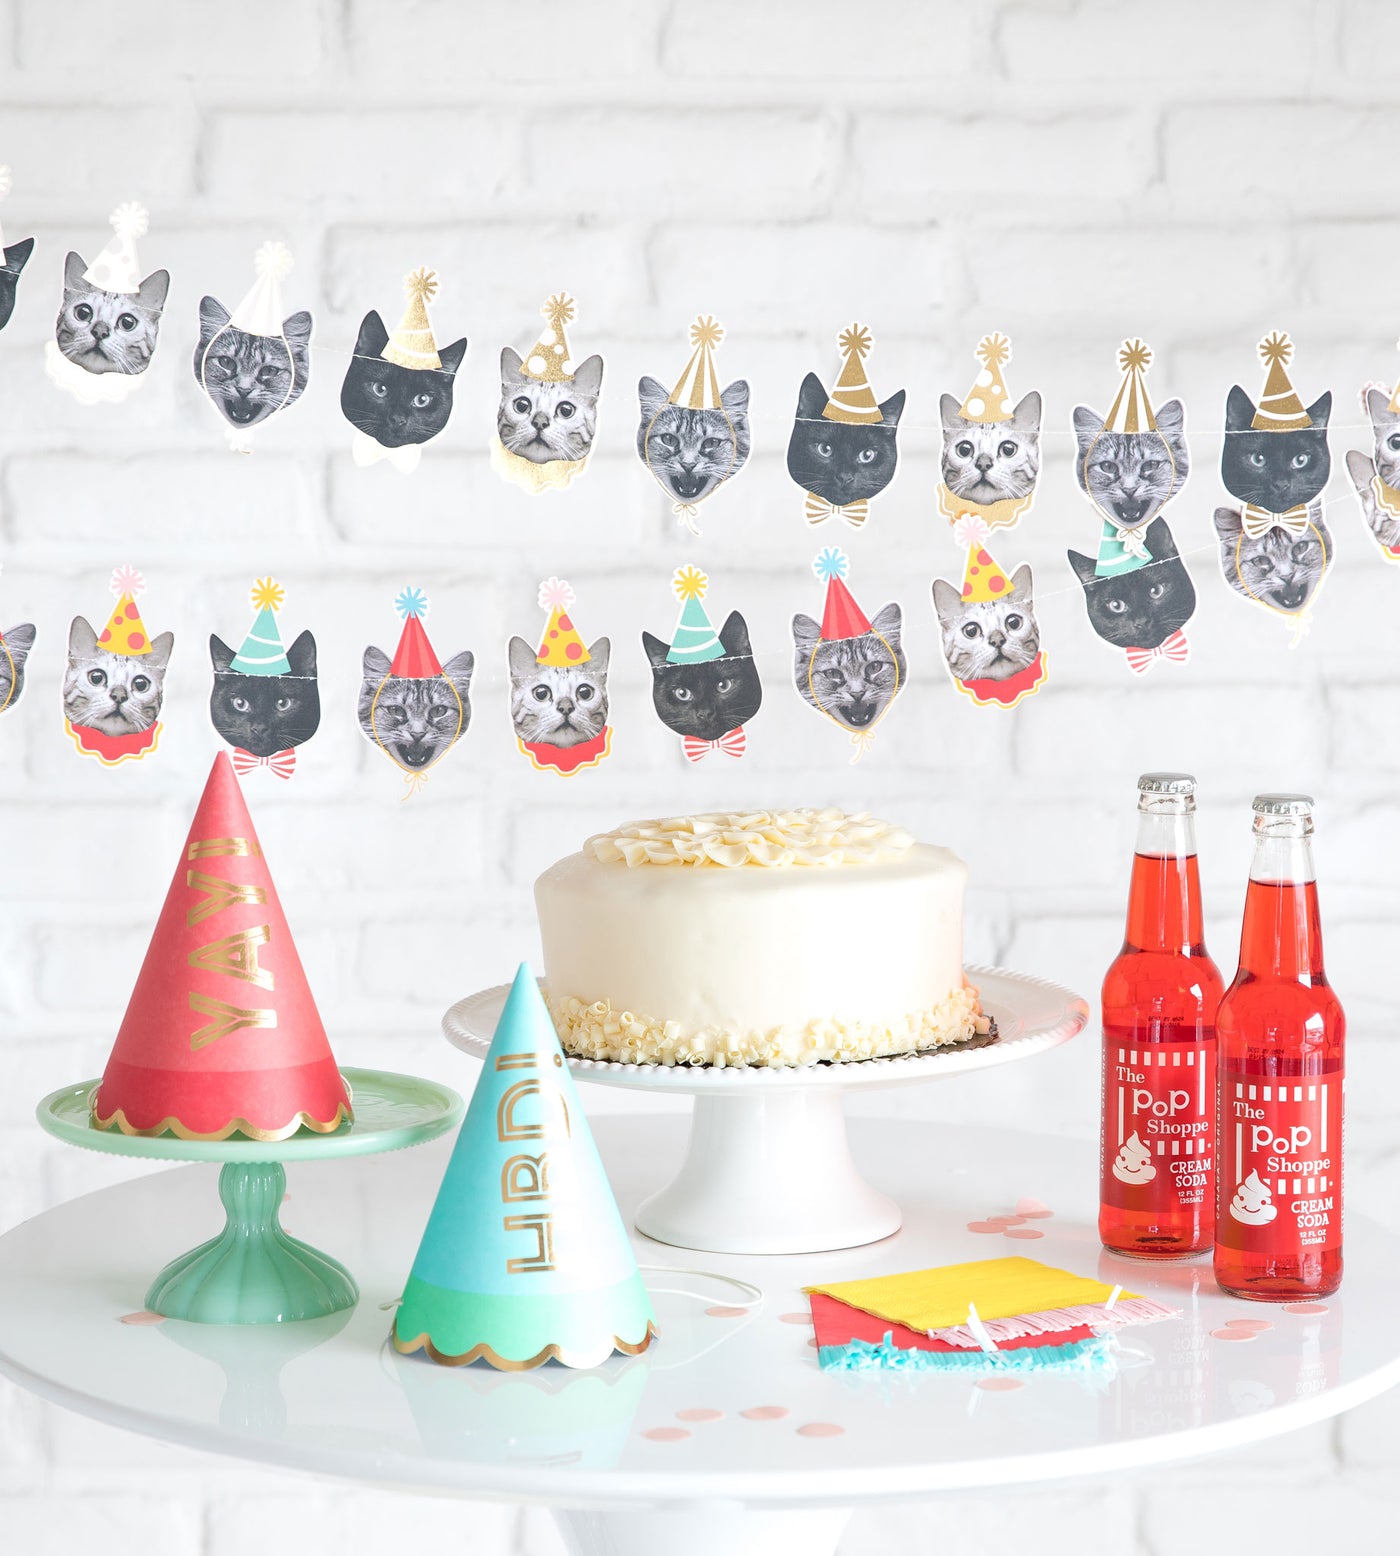 Party Animals Cat Banner - My Mind's Eye Paper Goods